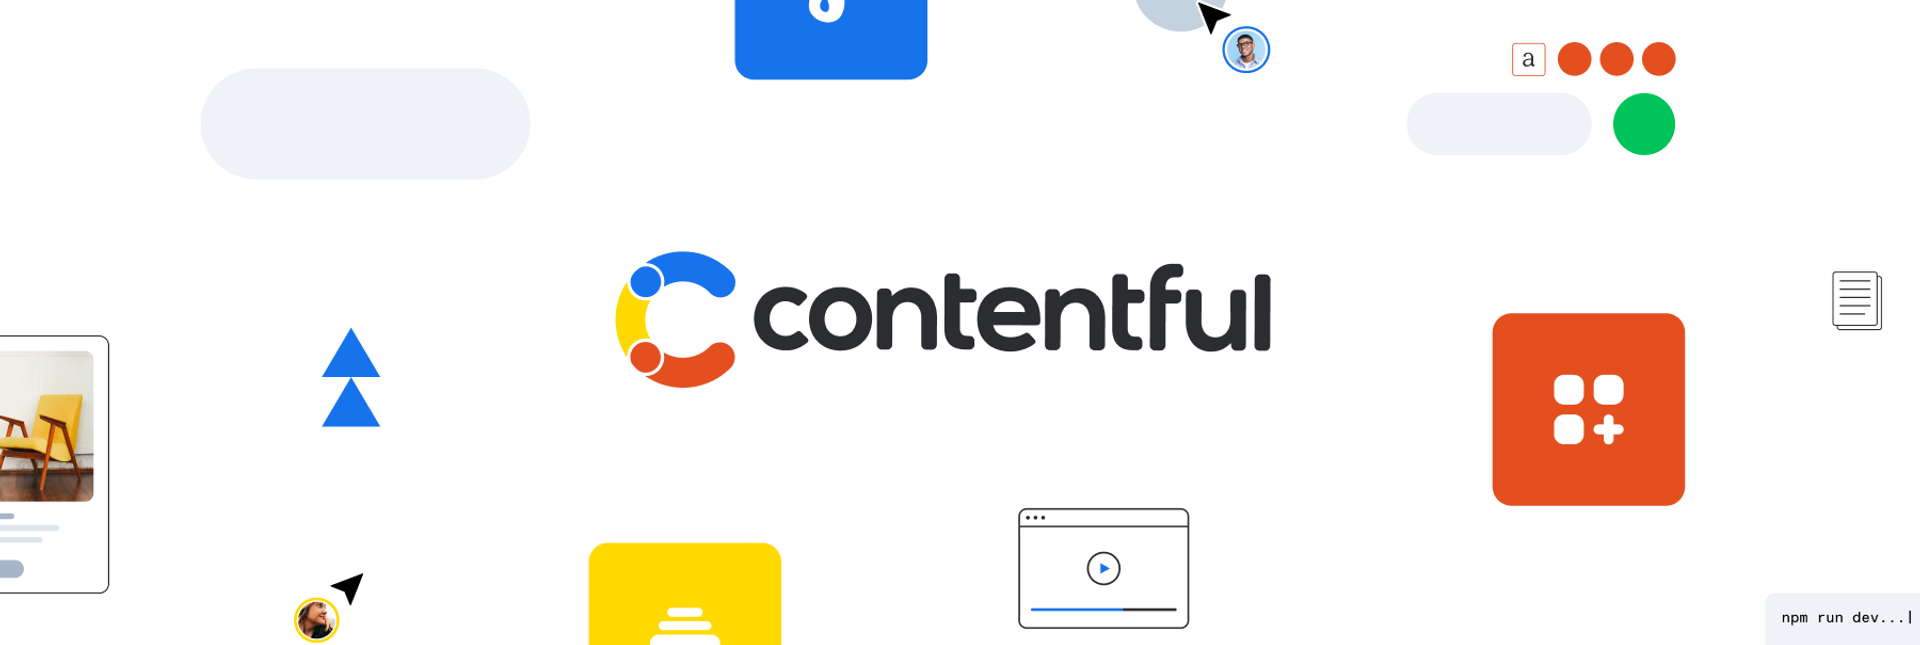 Contenful CMS overview 